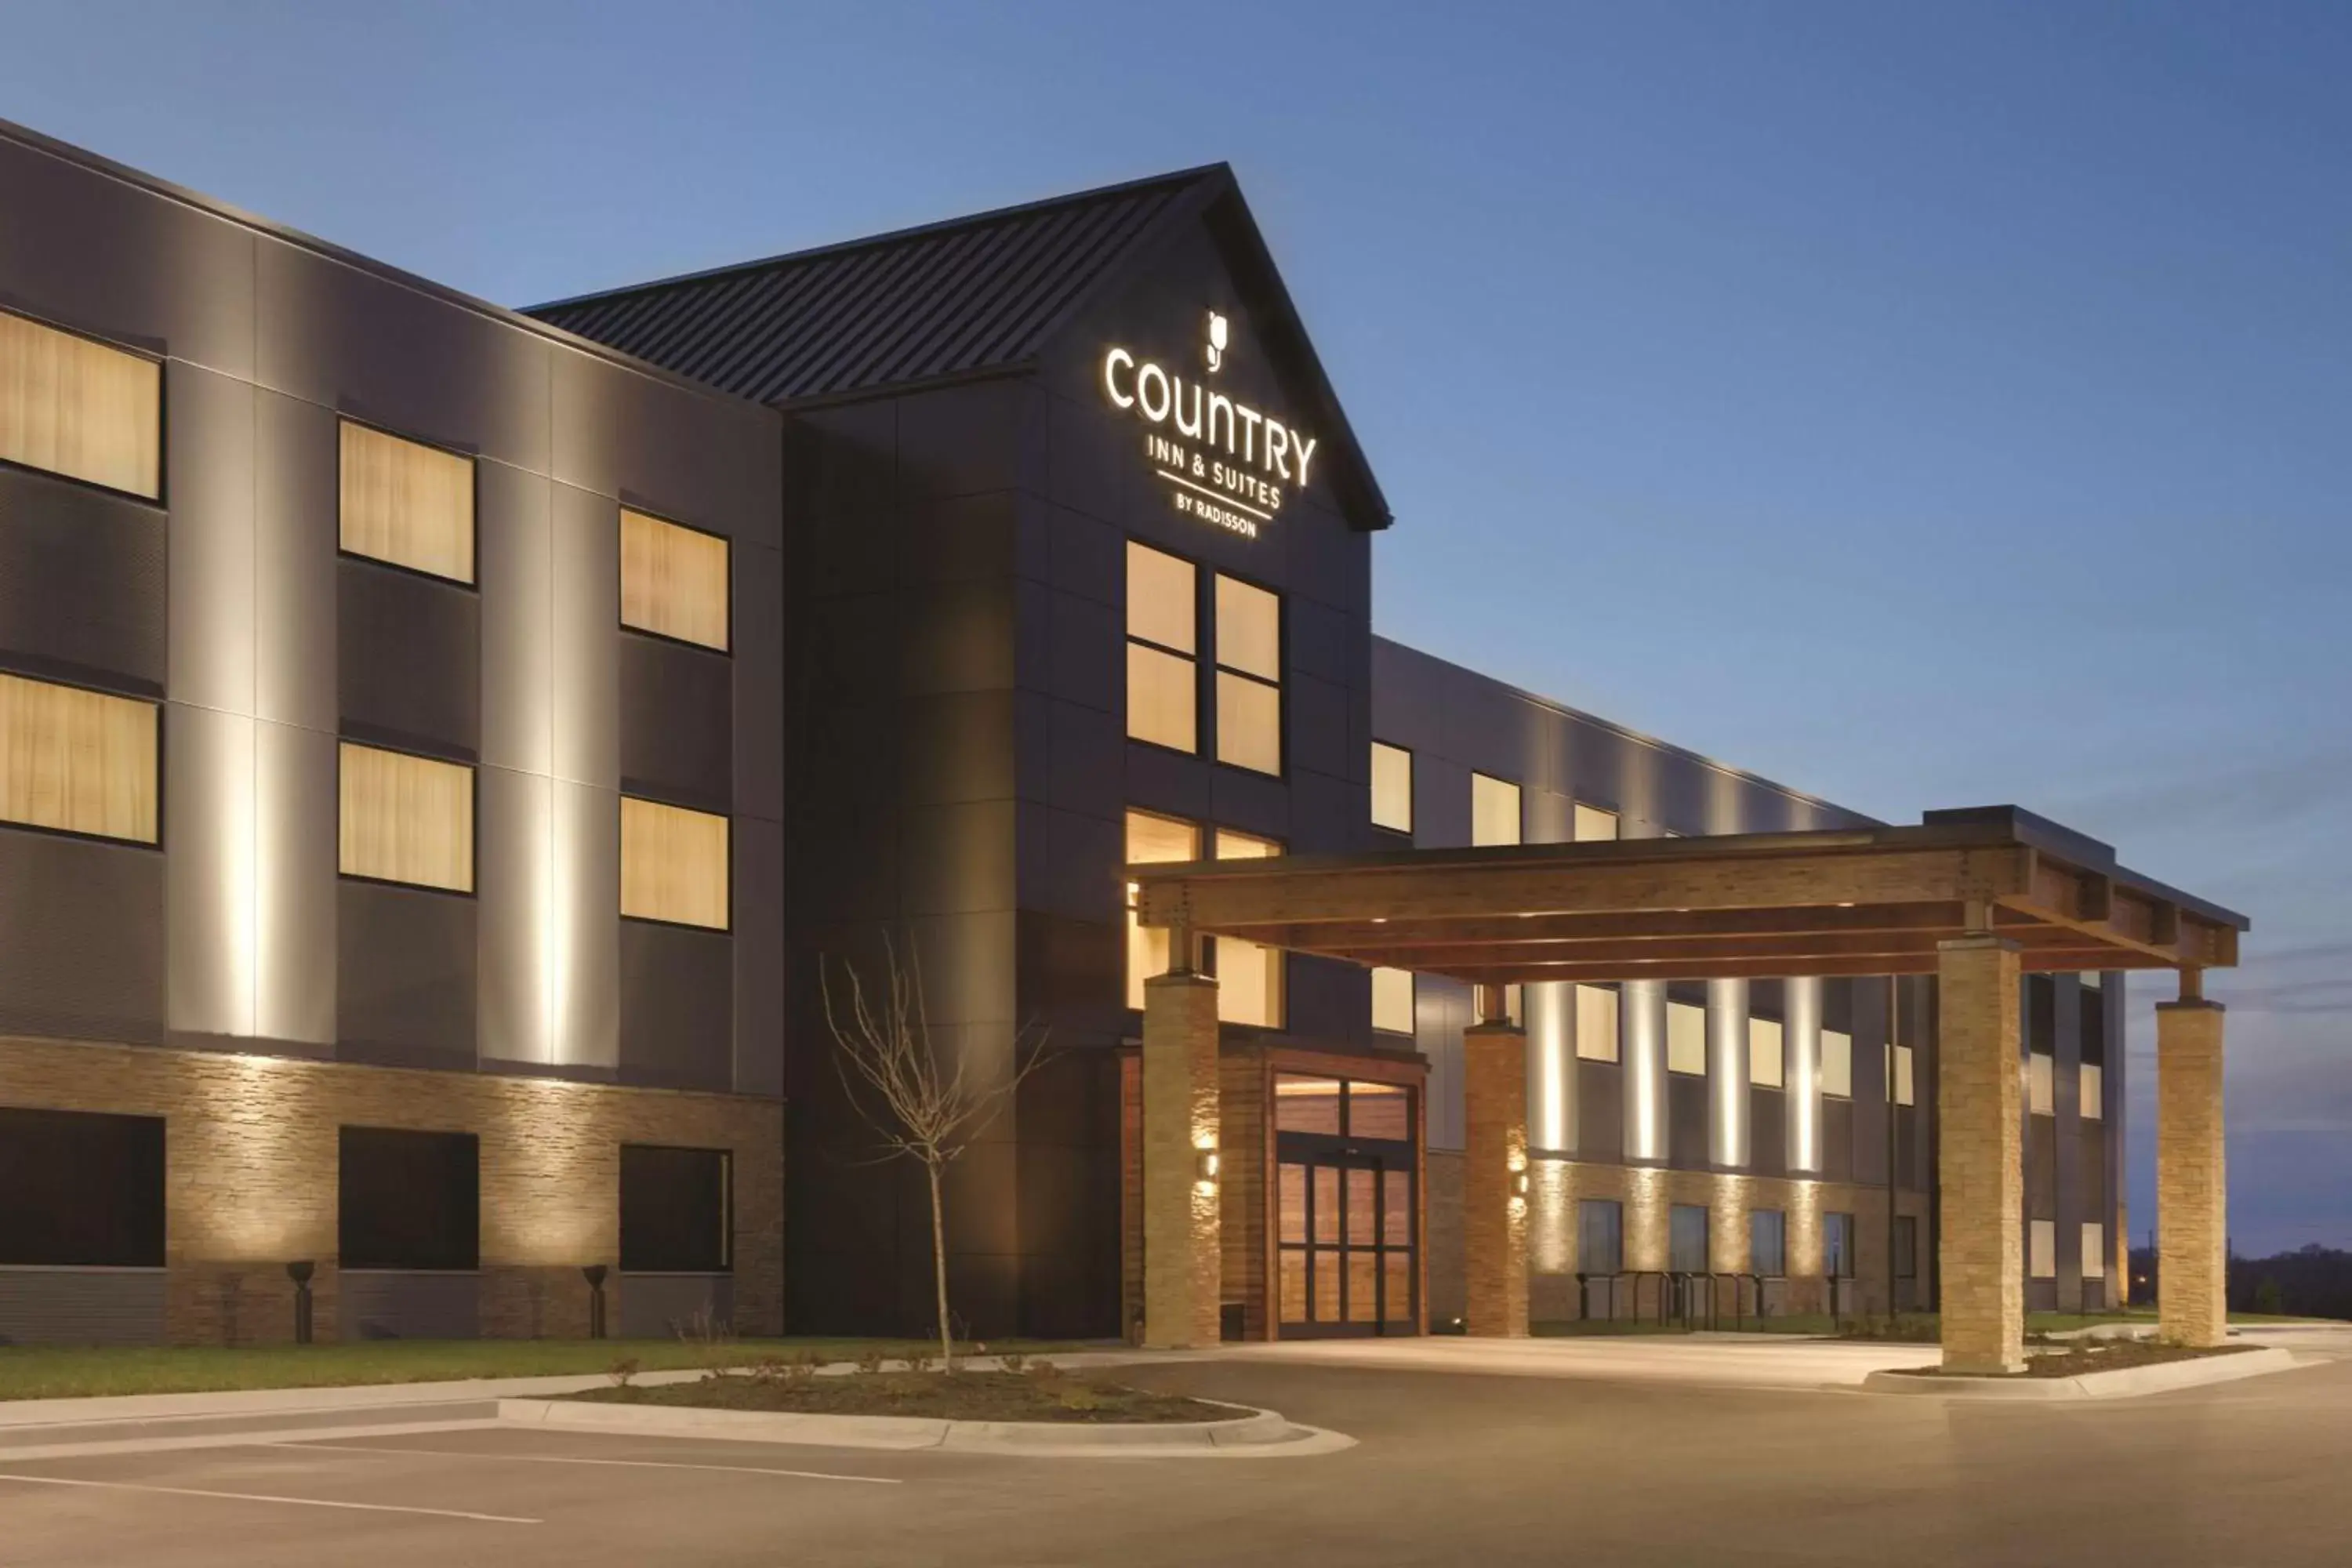 Property building in Country Inn & Suites by Radisson, Lawrence, KS